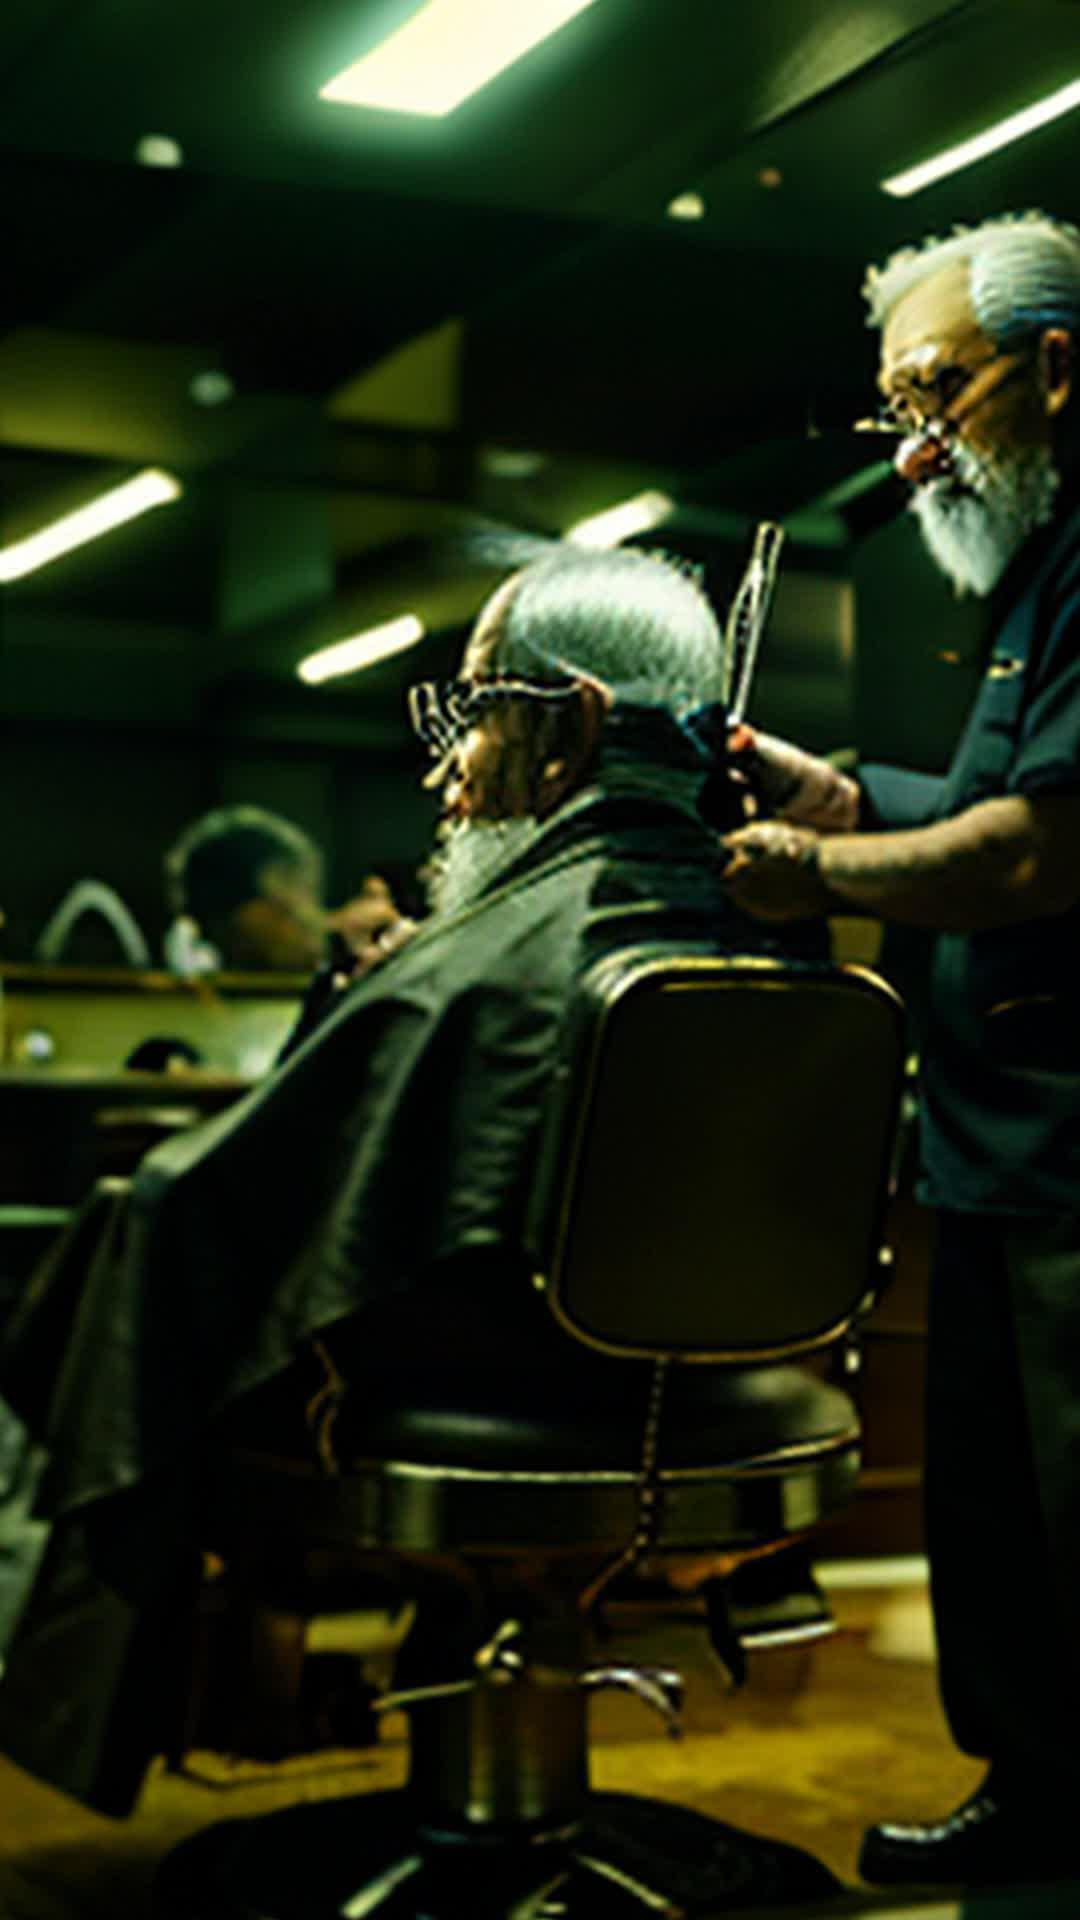 Elderly Asian man in barber shop, glinting scissors, skillfully snipping silver beard, bright overhead lights, barber chair, mirrors reflecting actions, atmosphere of anticipation